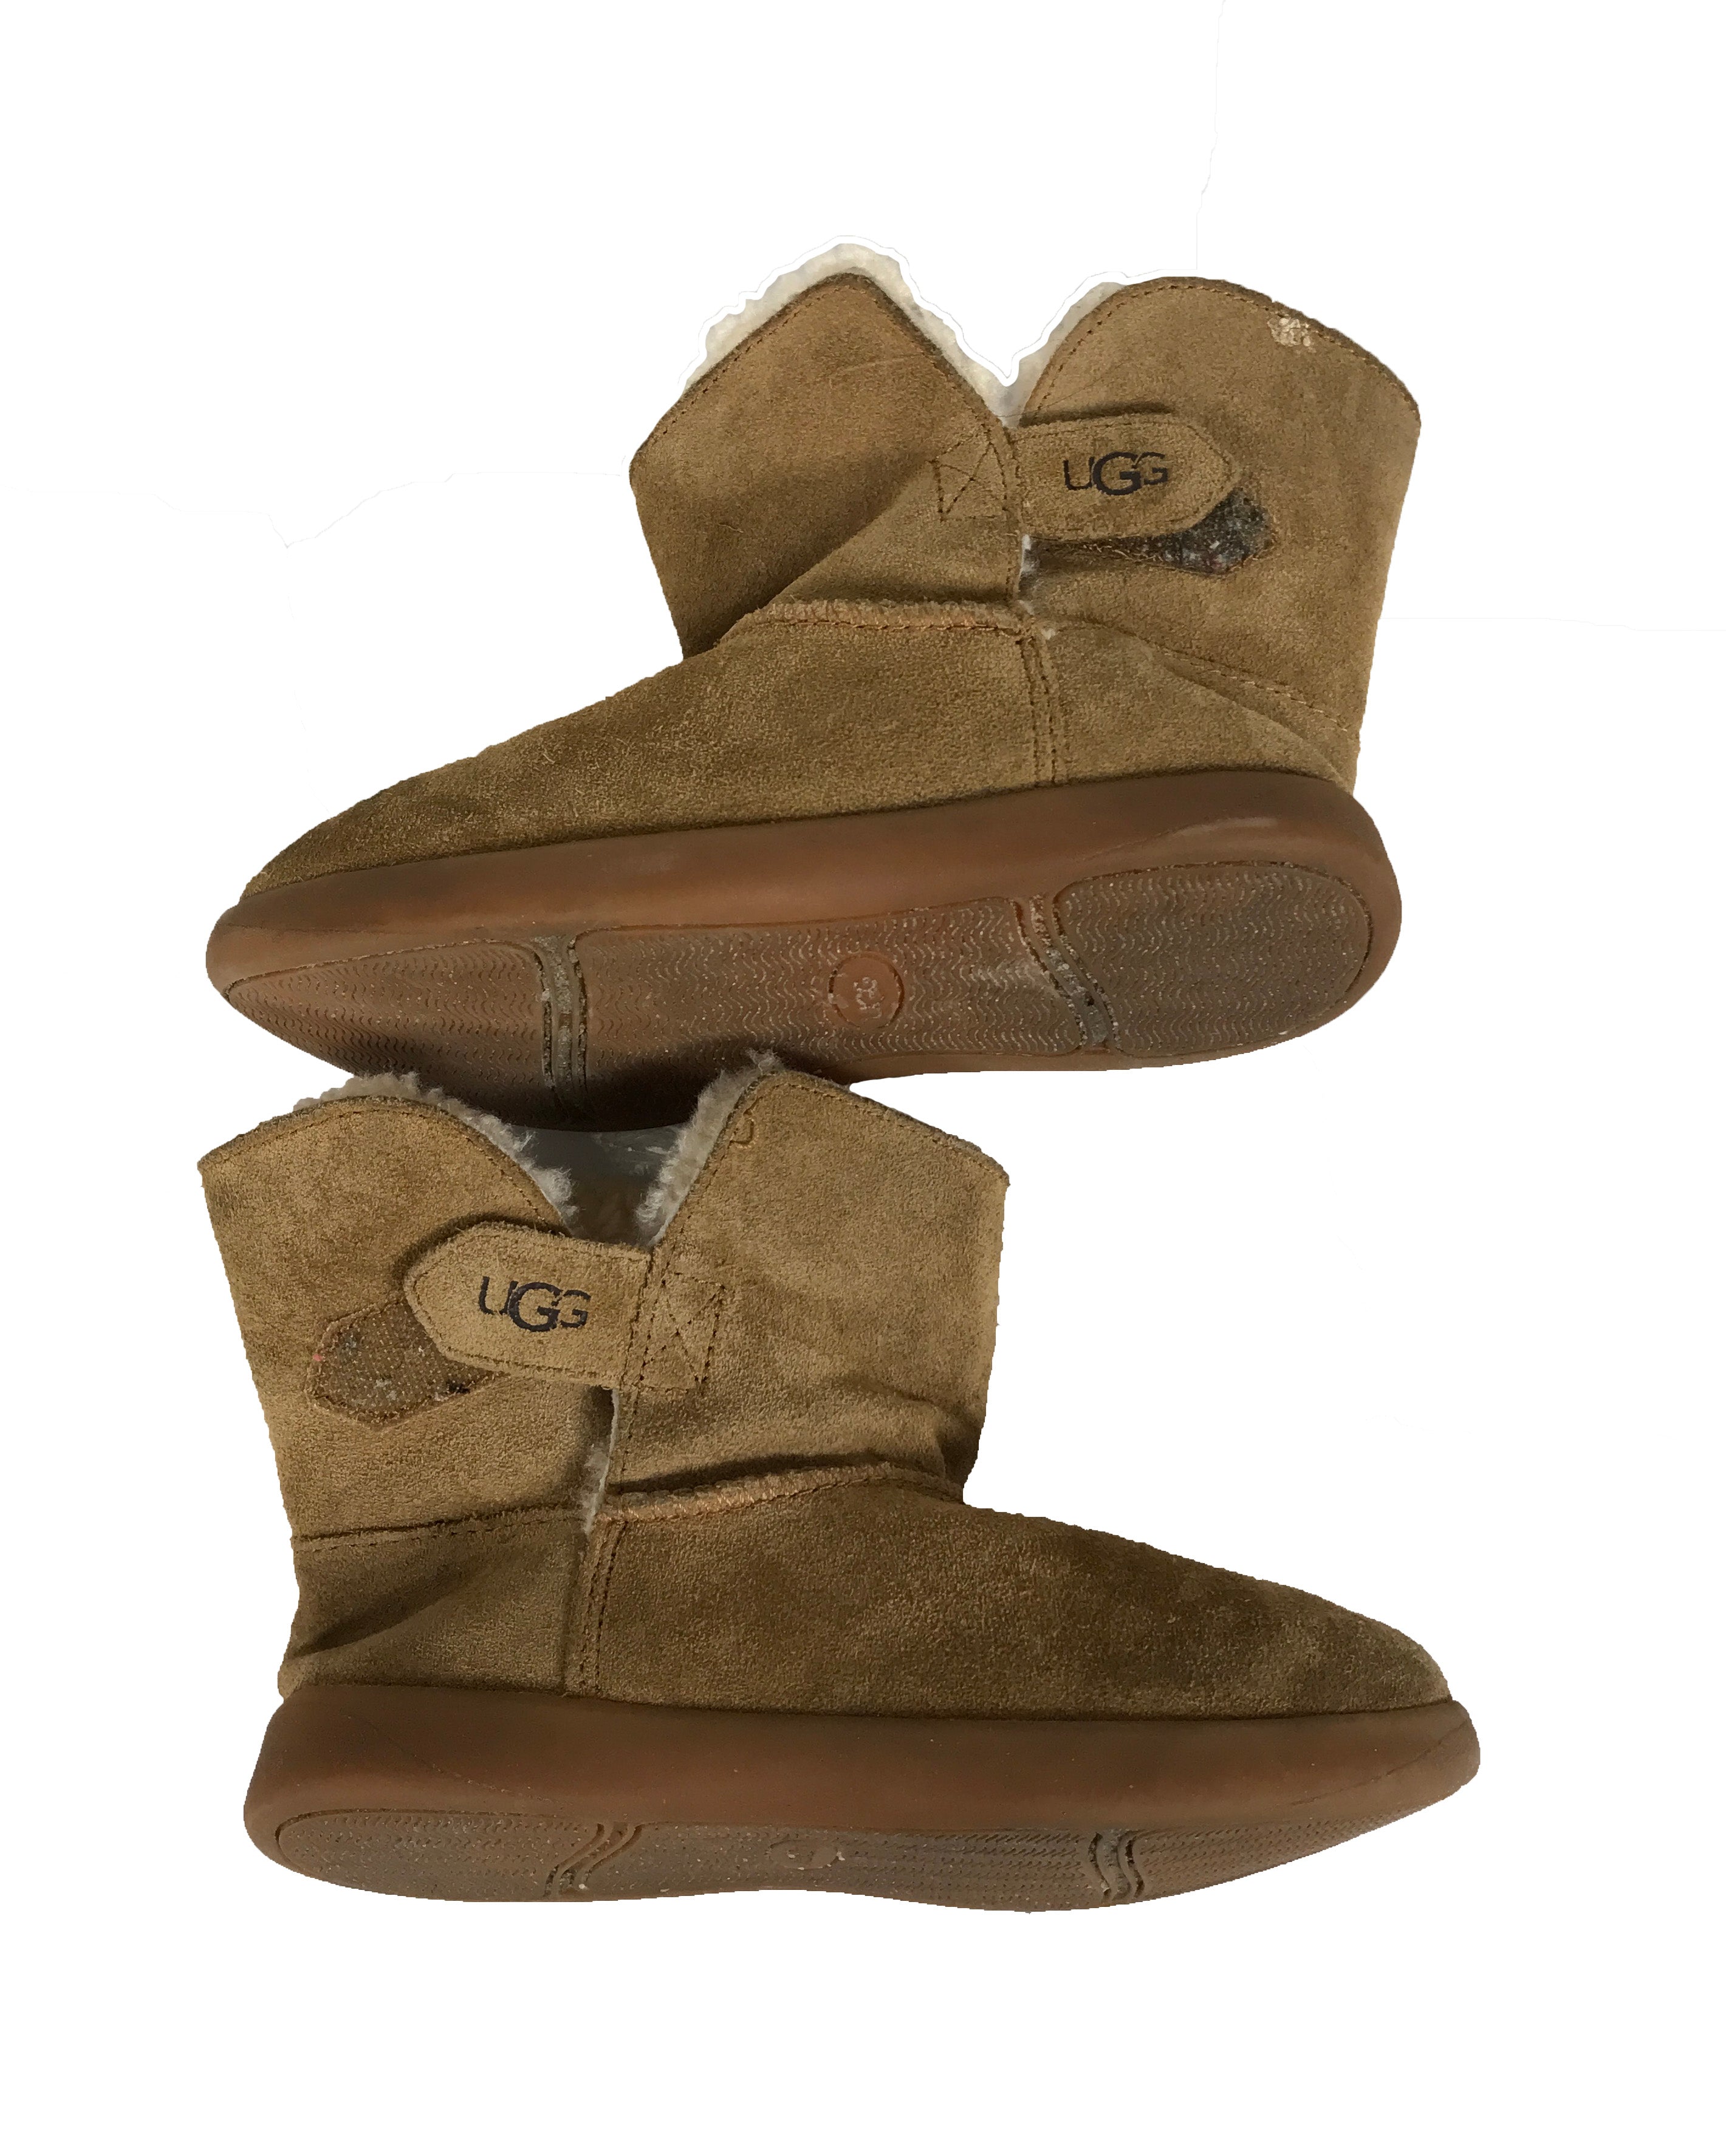 Ugg Boots Kid Size 12